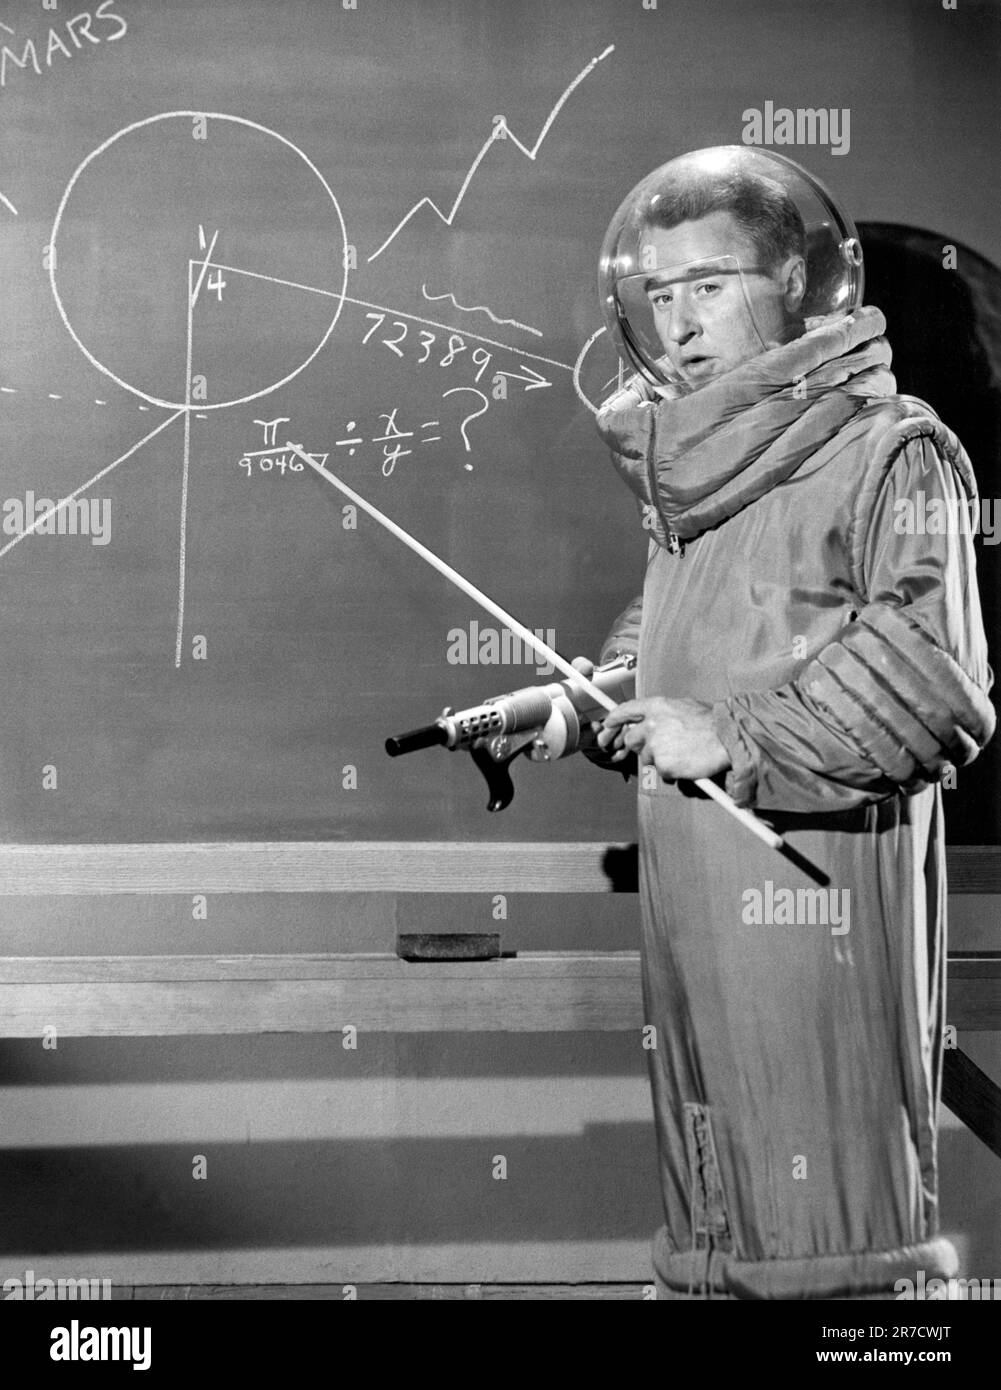 Hollywood, California:  c.  1958   Actor and comedian George Gobel wearing a spacesuit while standing at a school blackboard. Stock Photo